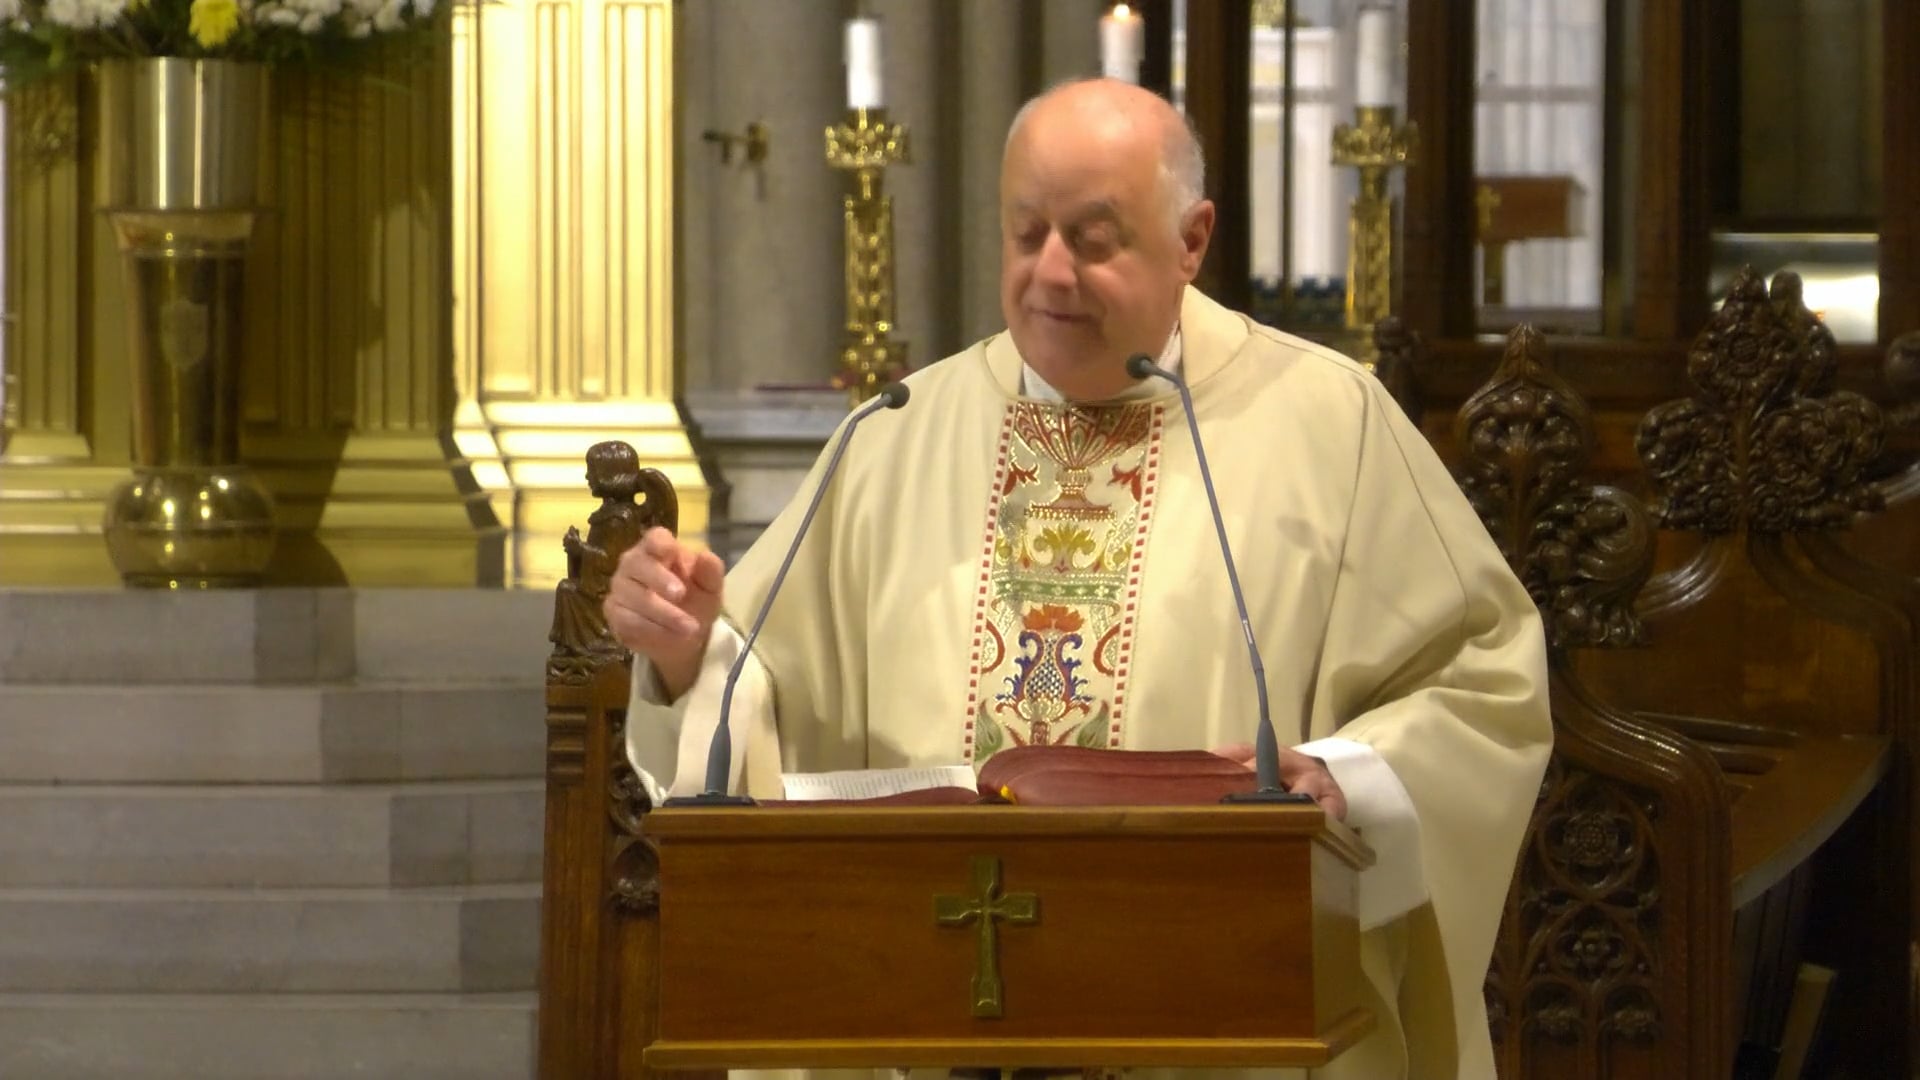 Mass from St. Patrick's Cathedral - September 29, 2022